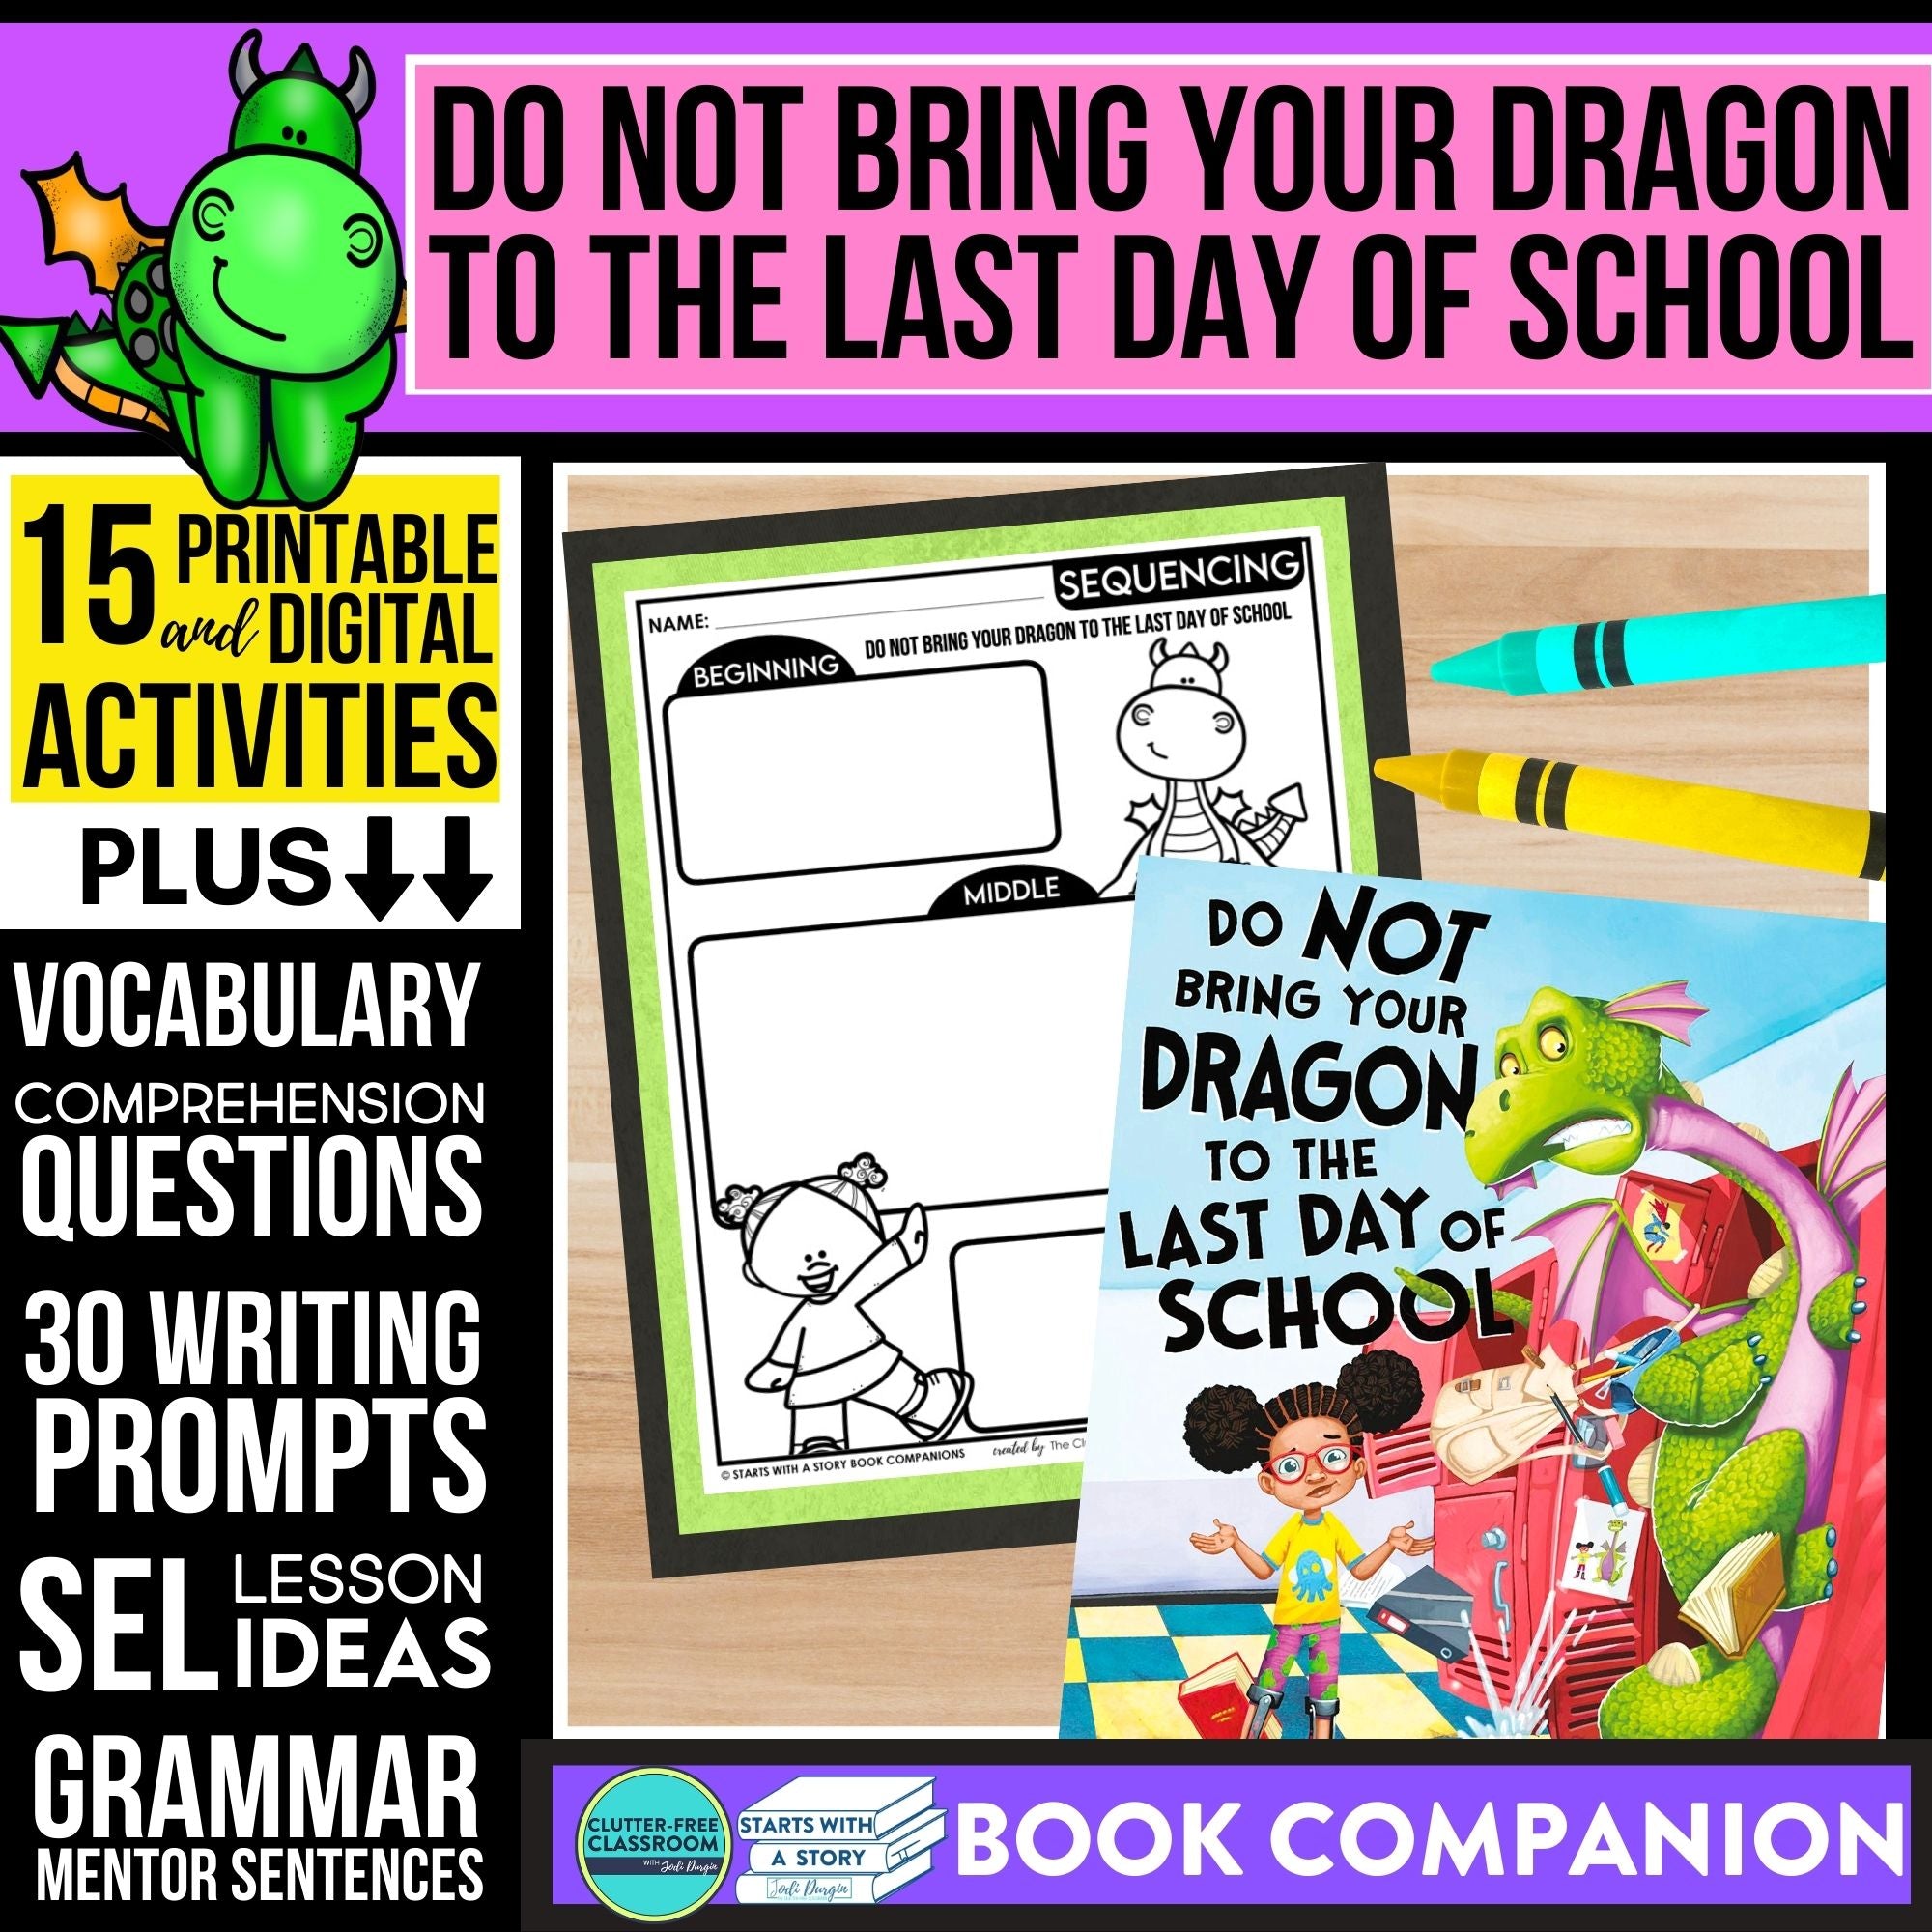 DO NOT BRING YOUR DRAGON TO THE LAST DAY OF SCHOOL activities and lesson plan ideas